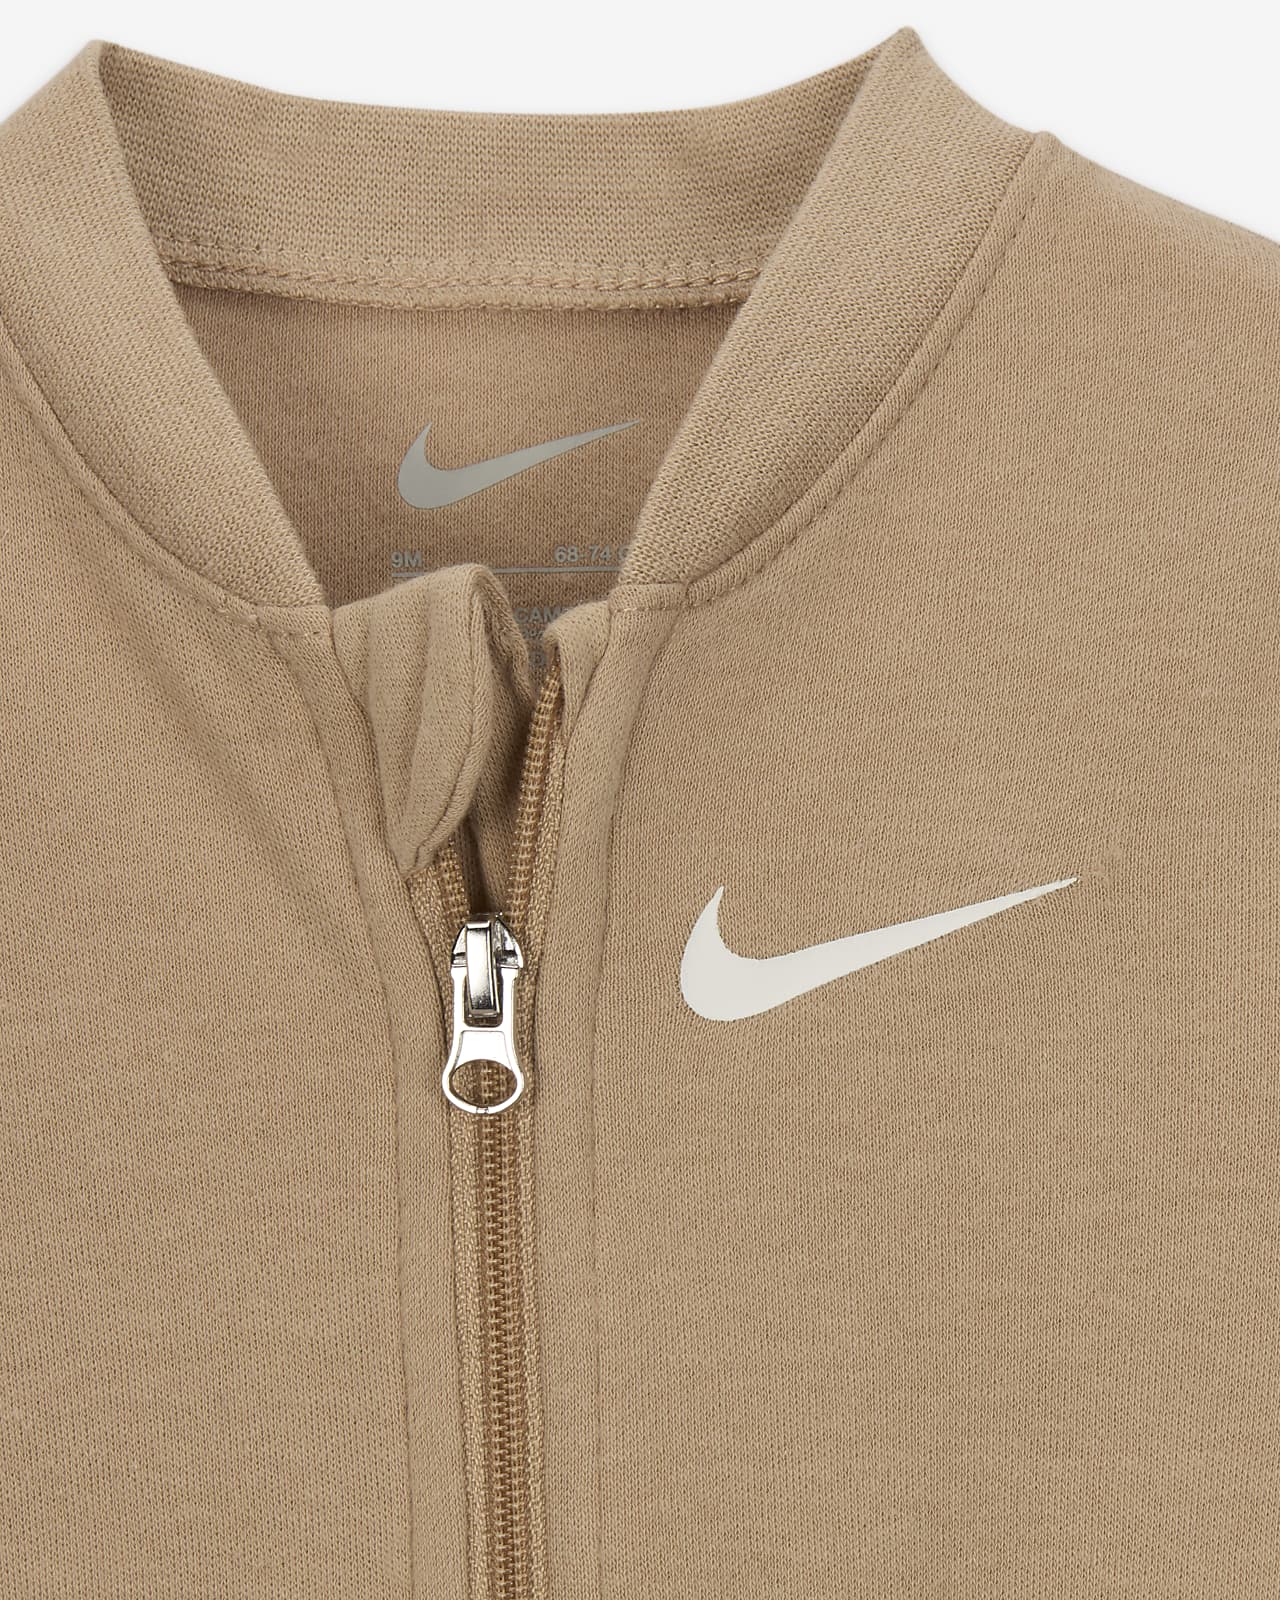 Footed Baby Essentials Nike Coverall Coverall.